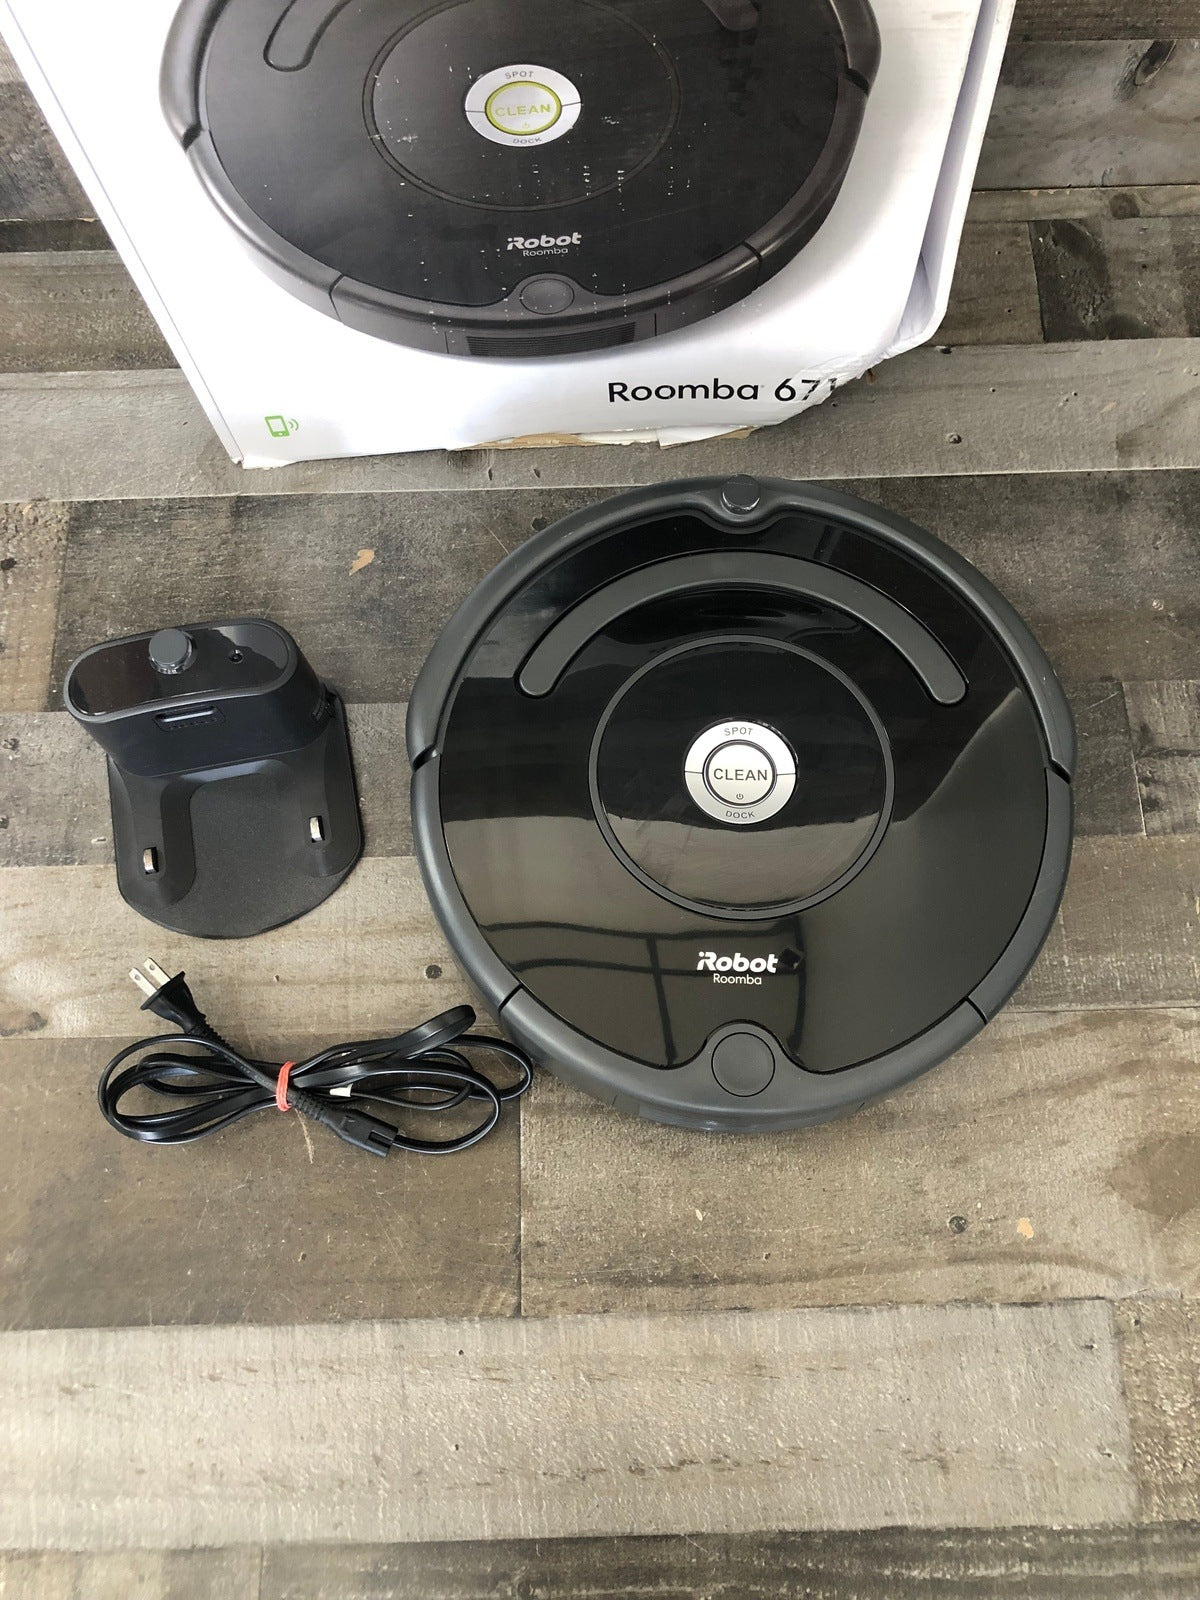 iRobot Roomba 671020 Robot Vacuum with Wi-Fi Connectivity, Works with Alexa, Good for Pet Hair, Carpets, and Hard Floors